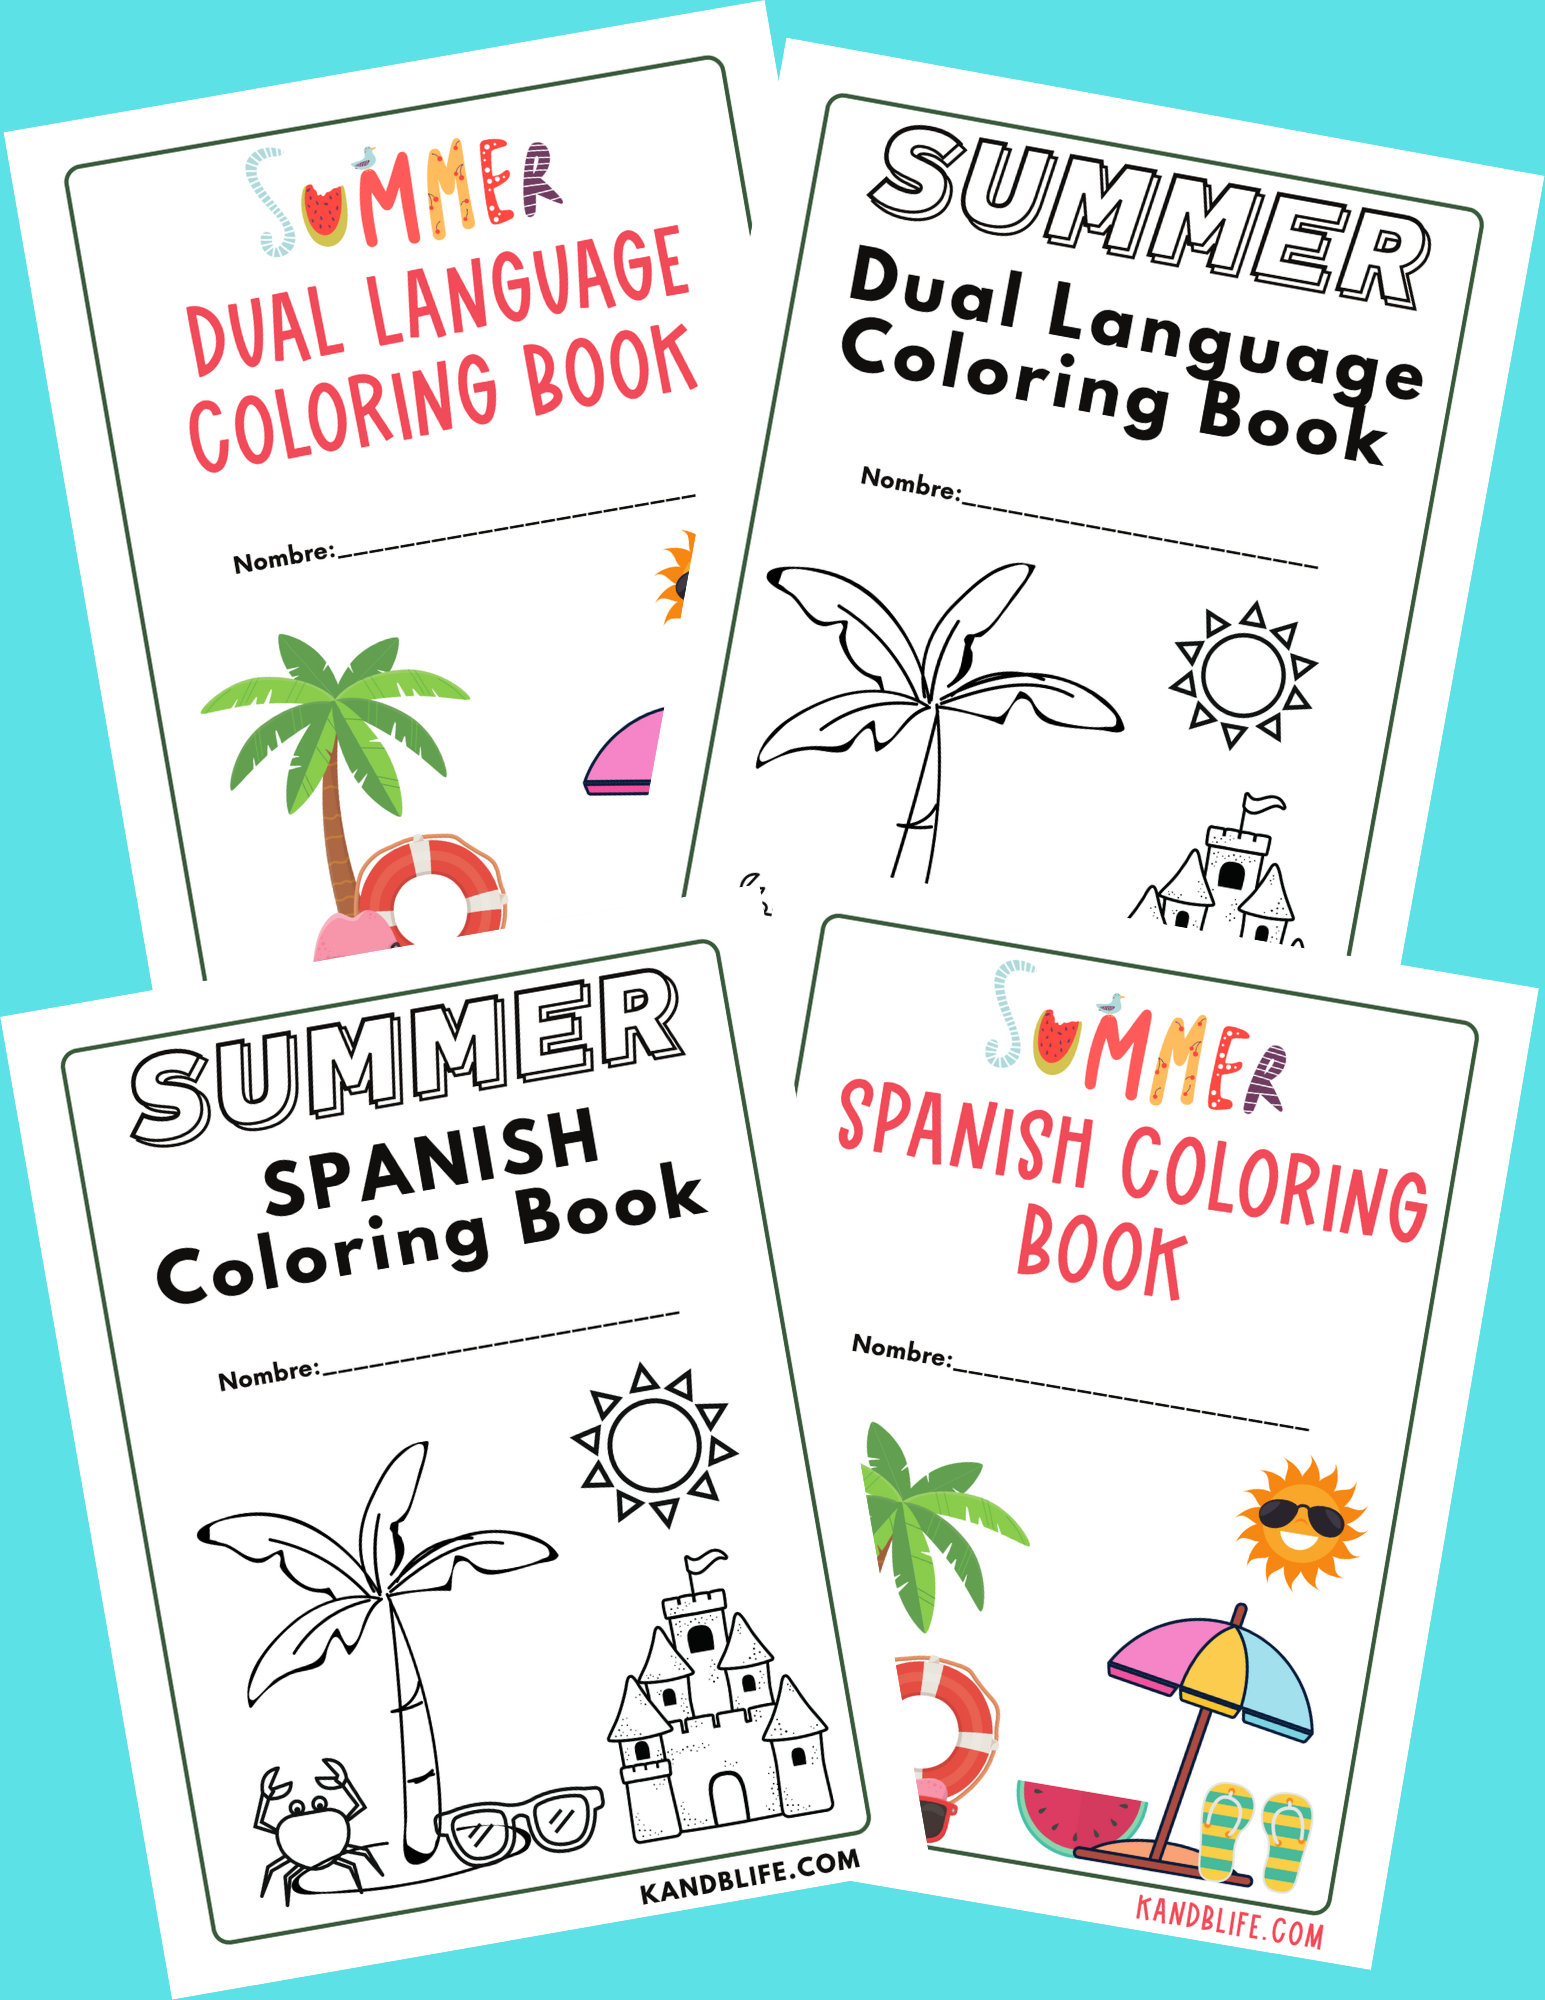 Cover display for the Summer Spanish and Dual Language Coloring Books. 2 are in color and 2 are in black/white.